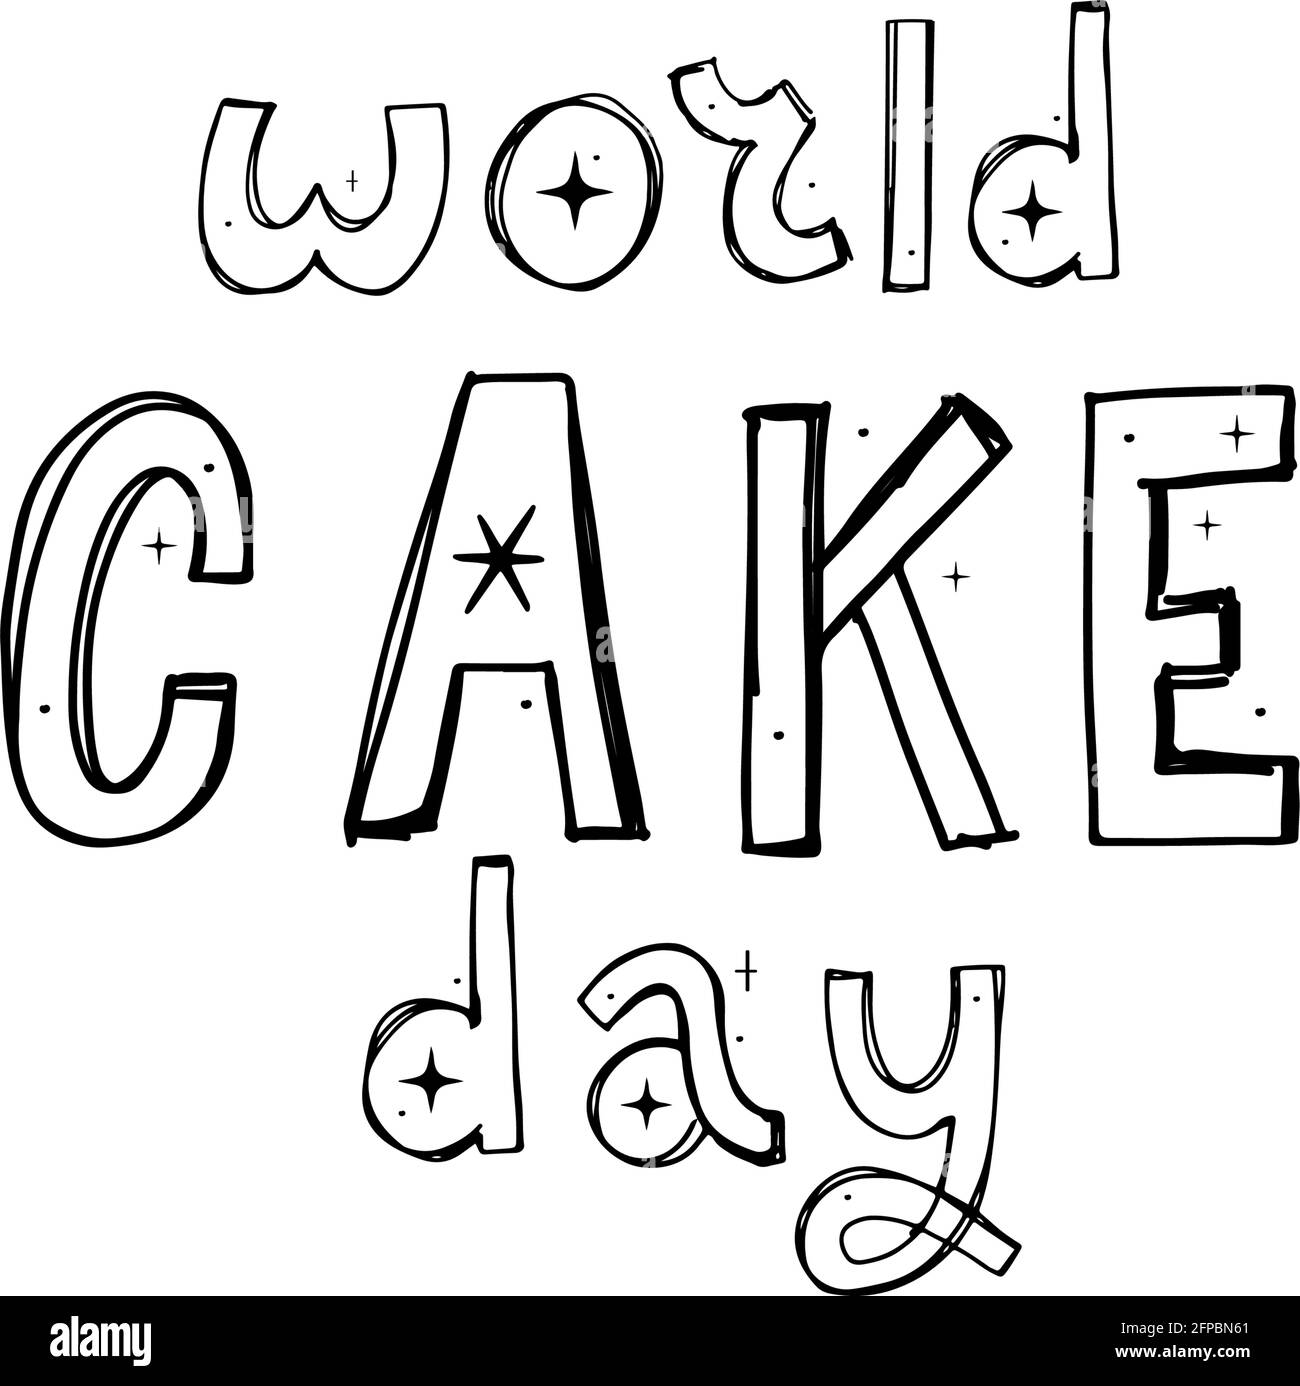 Happy Cake day Lettering Calligraphy llustration Vector Design Color Stock Vector